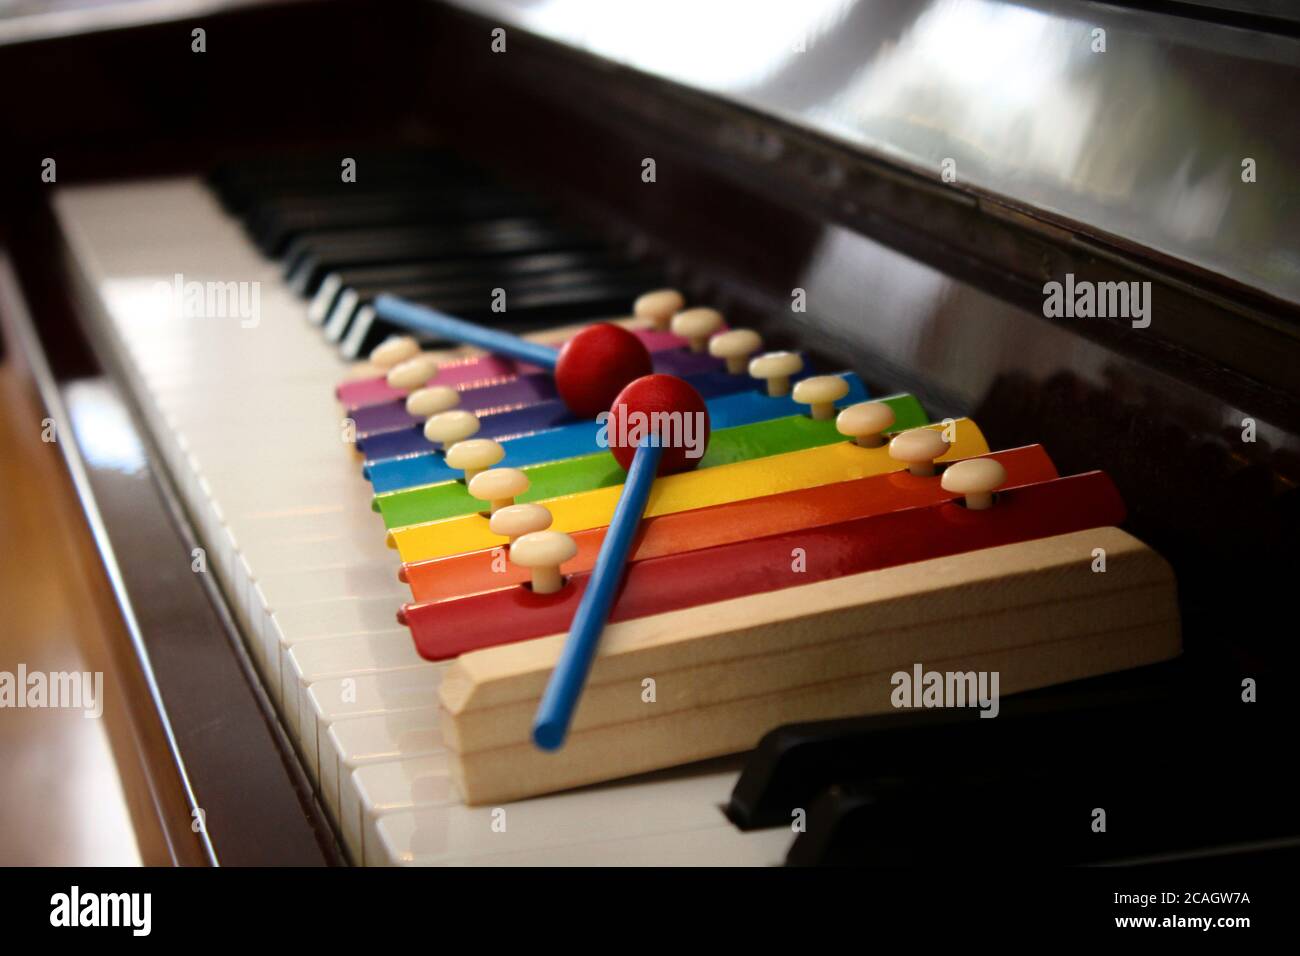 Close up image of a colorful toy xylophone with mallets put on the keyboard of a classical piano. Stock Photo